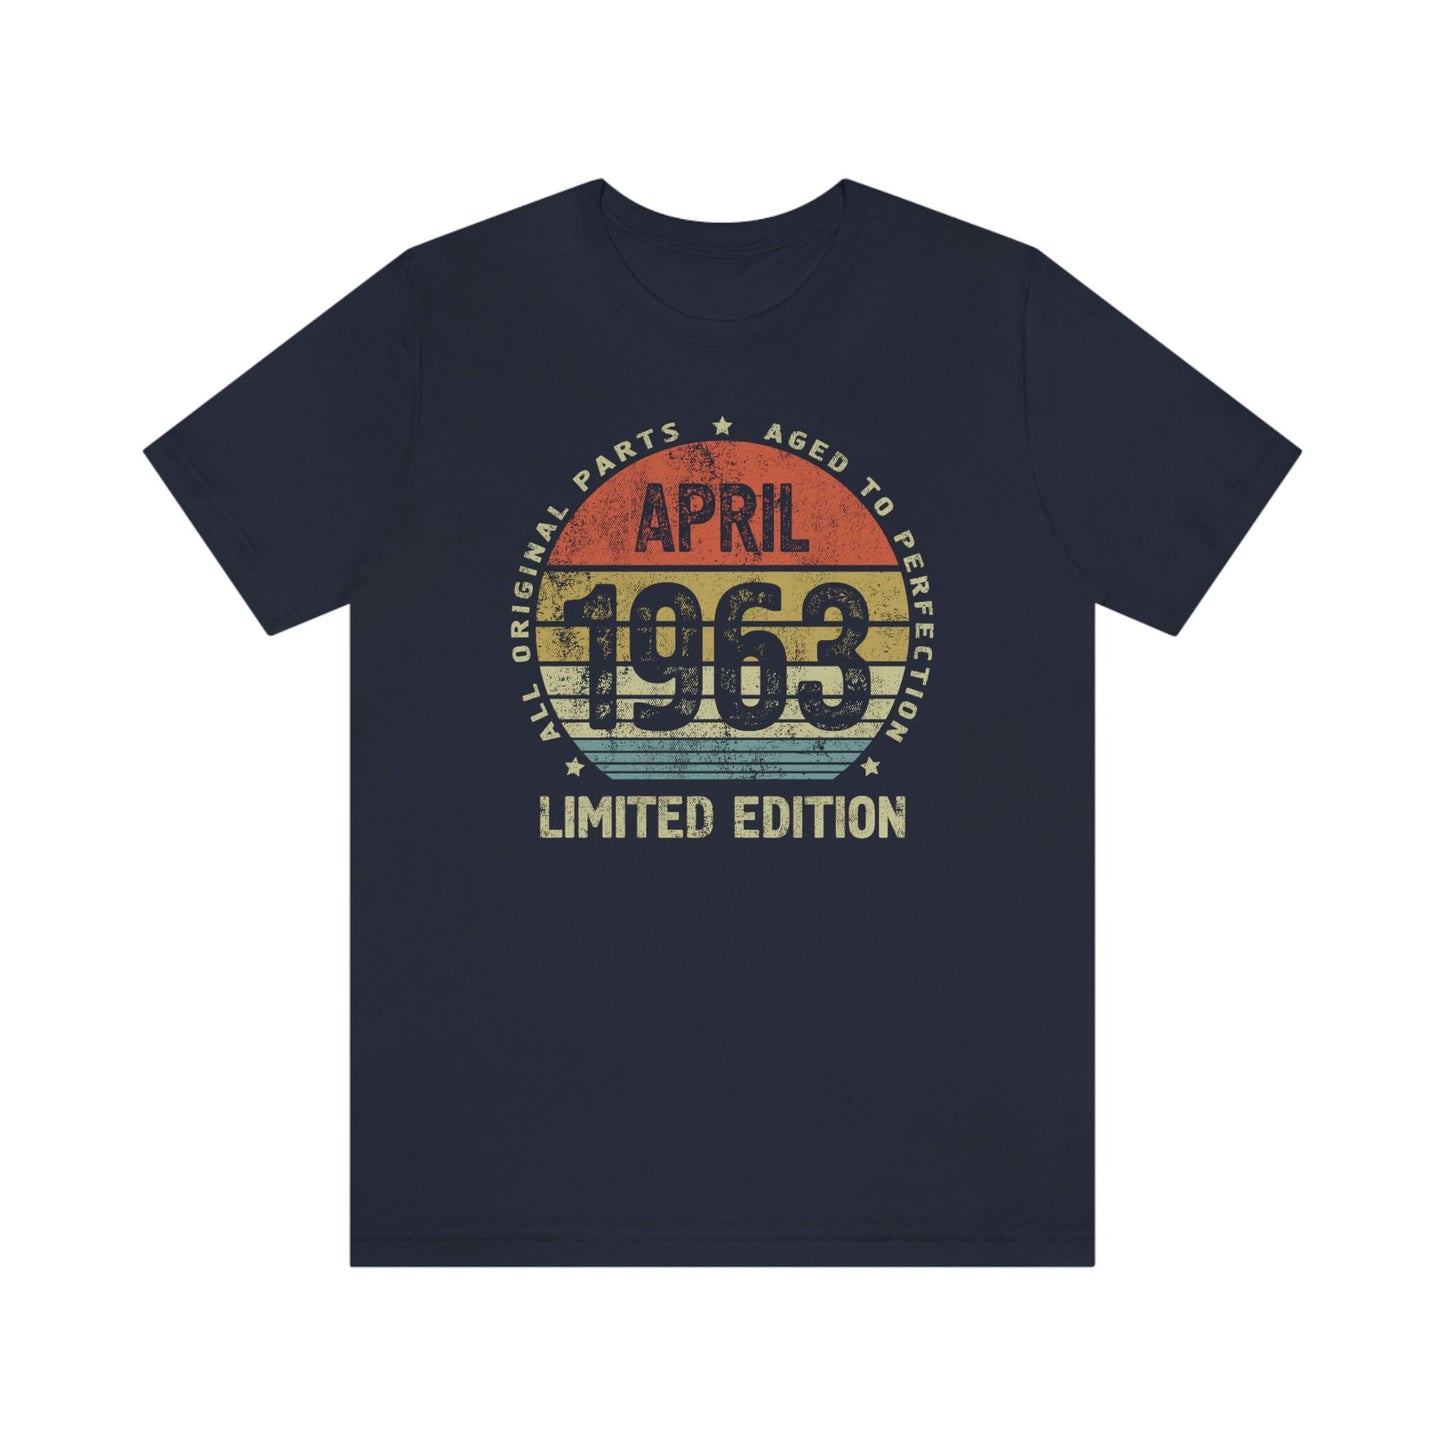 April 1963 birthday shirt for women or men, Gift shirt for wife or husband